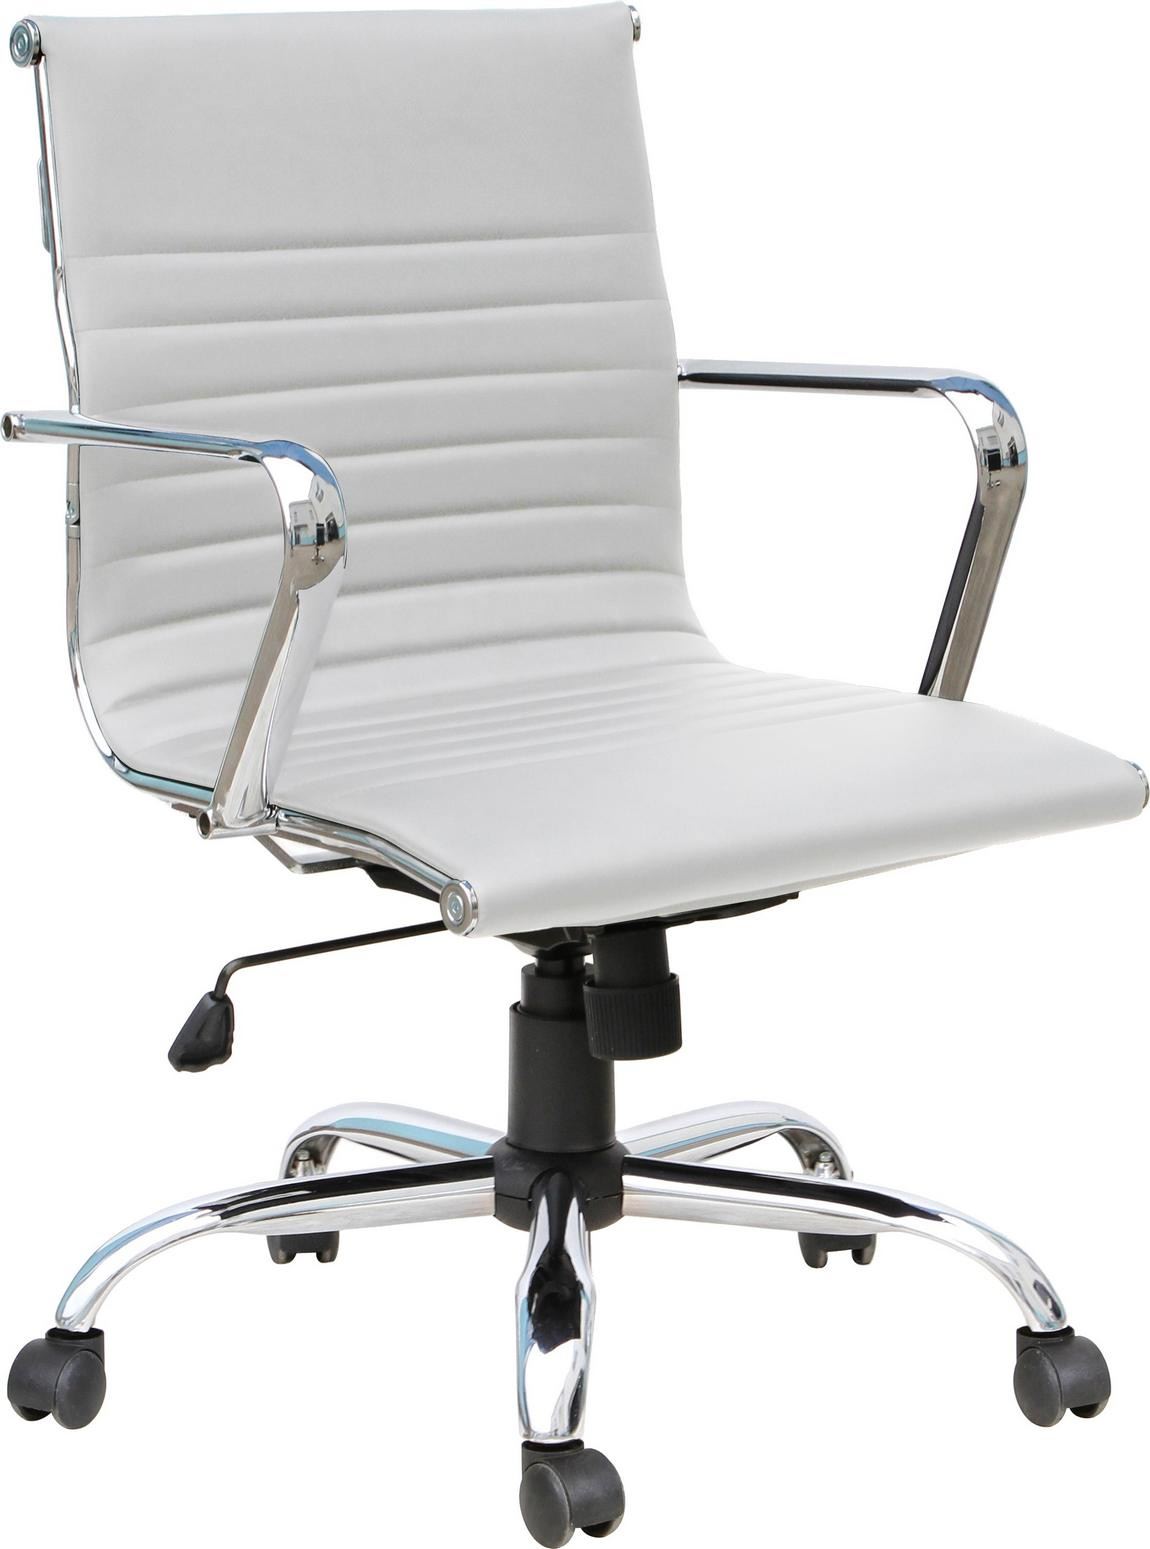 Modern Mid Back Conference Room Chair